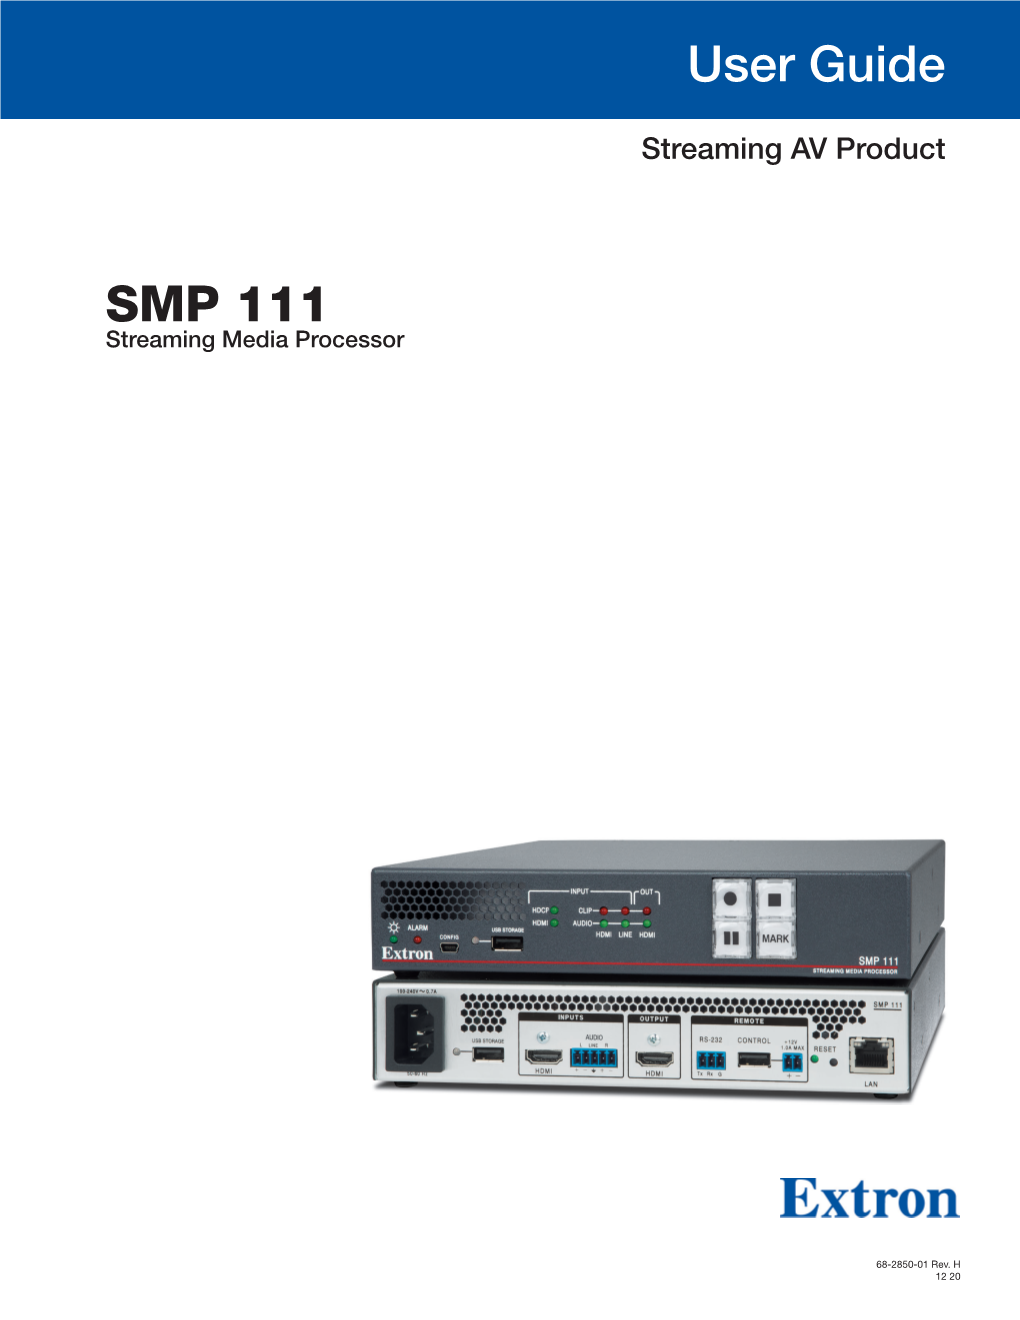 Extron SMP 111 User Guide